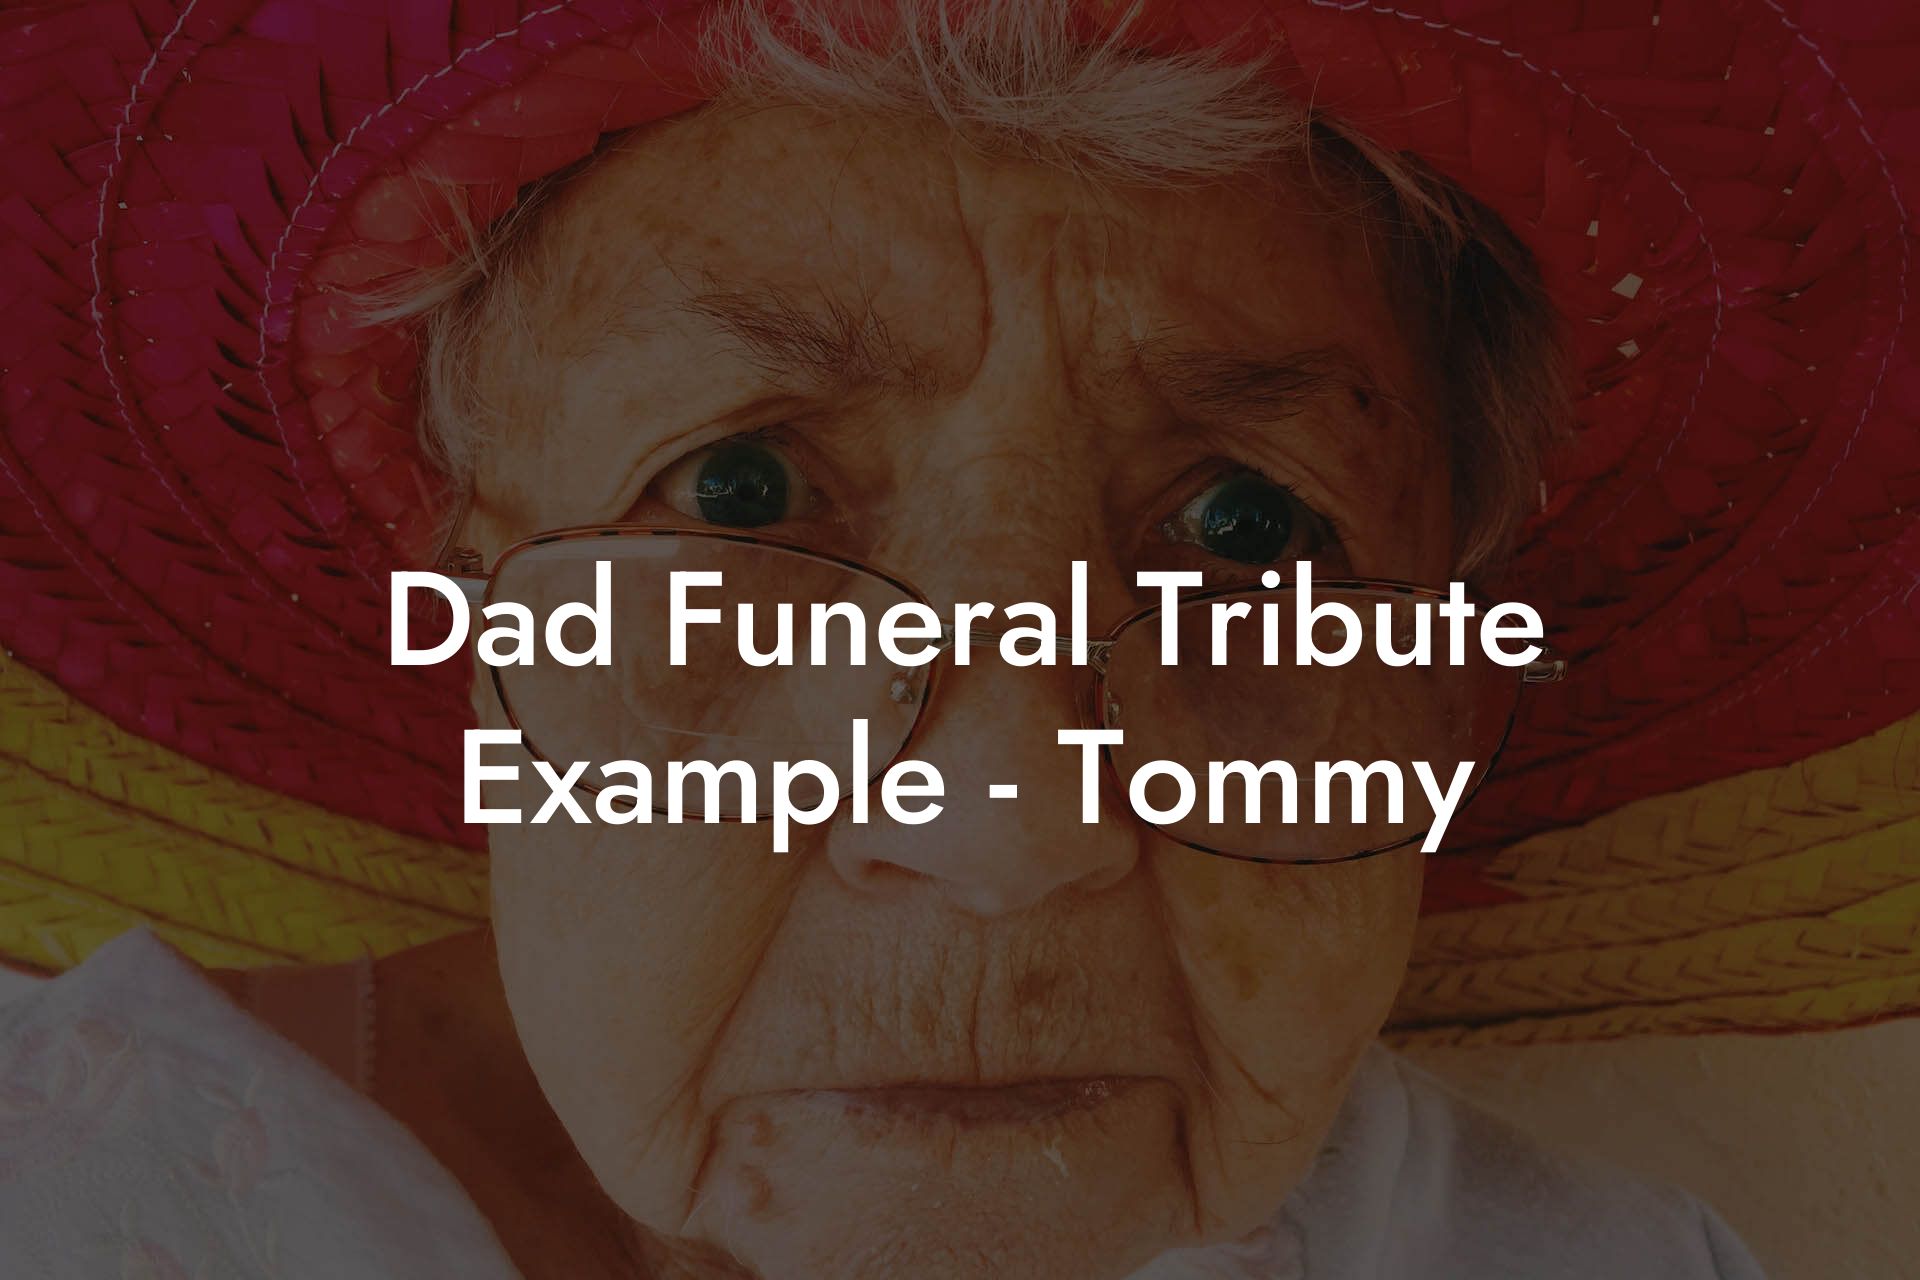 Dad Funeral Tribute Example - Tommy